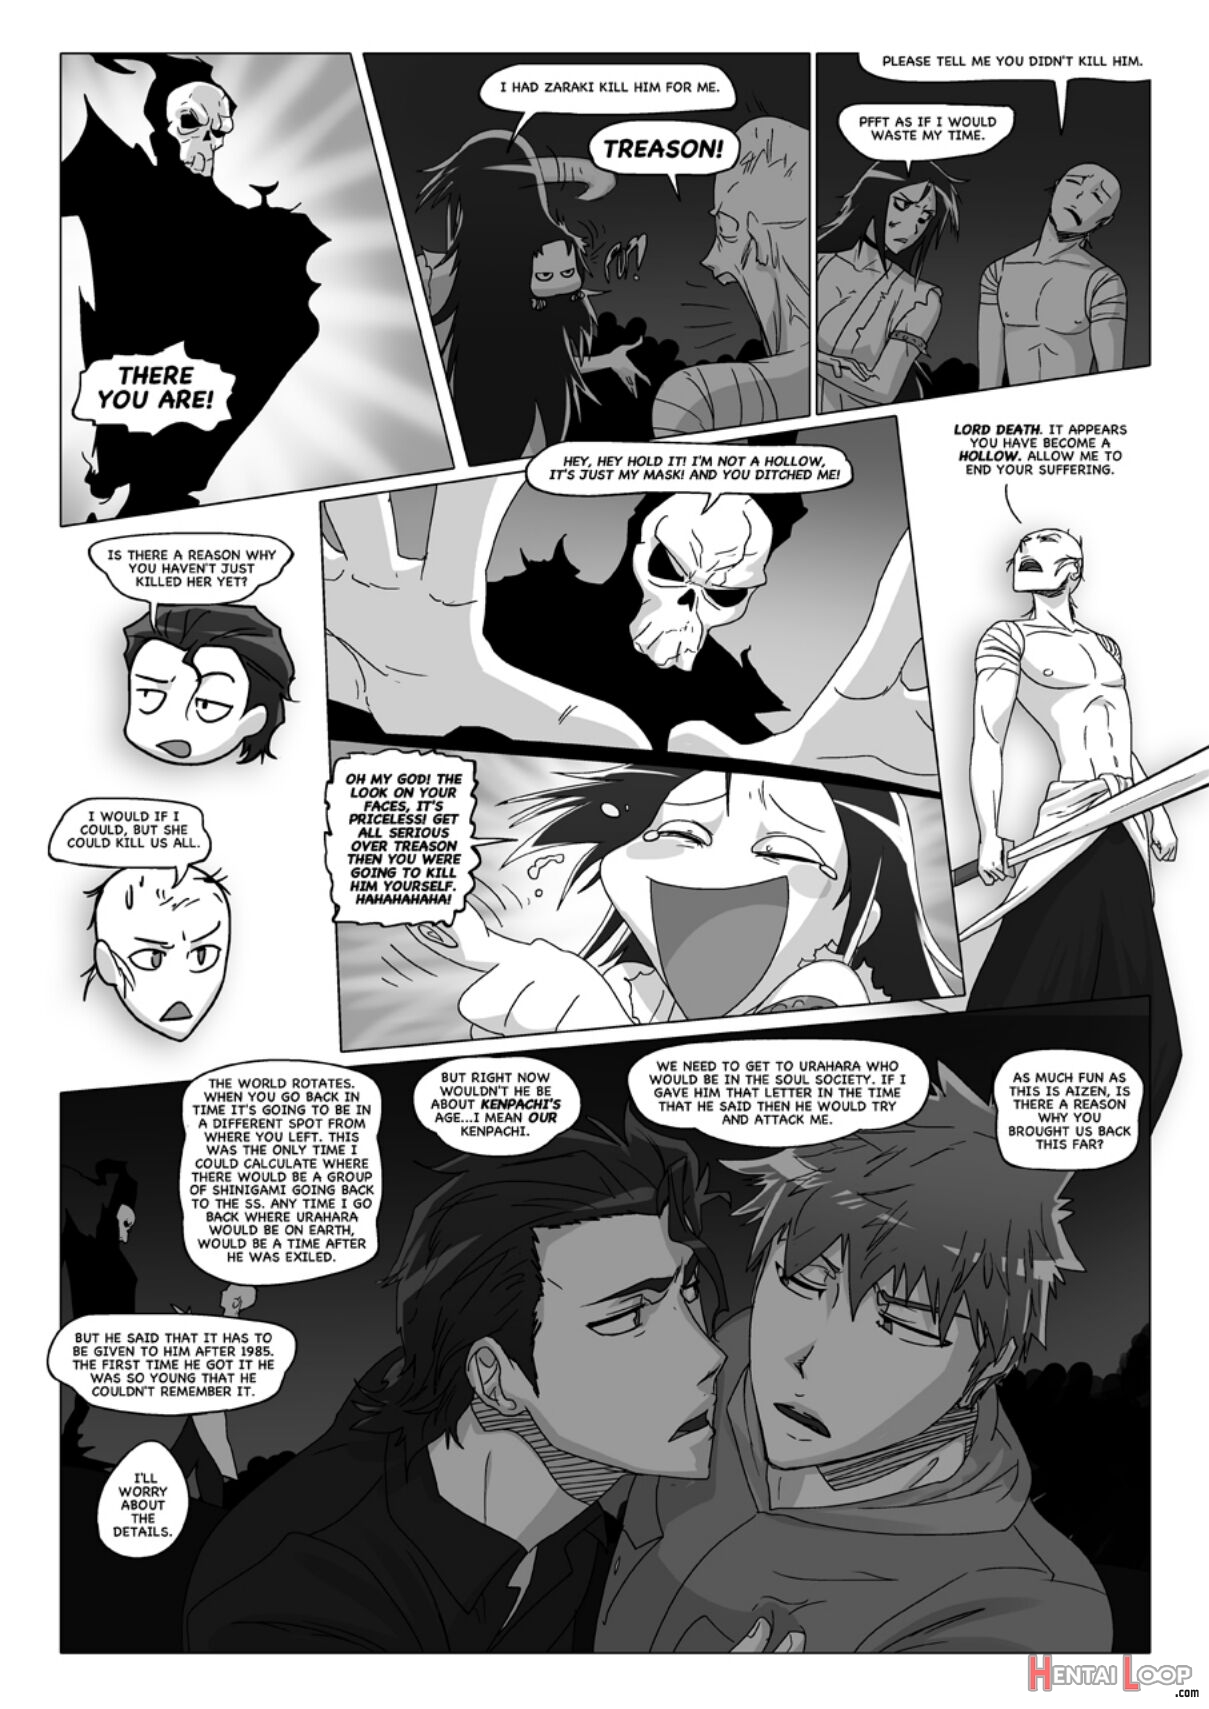 Happy To Serve You - Xxx Version page 316